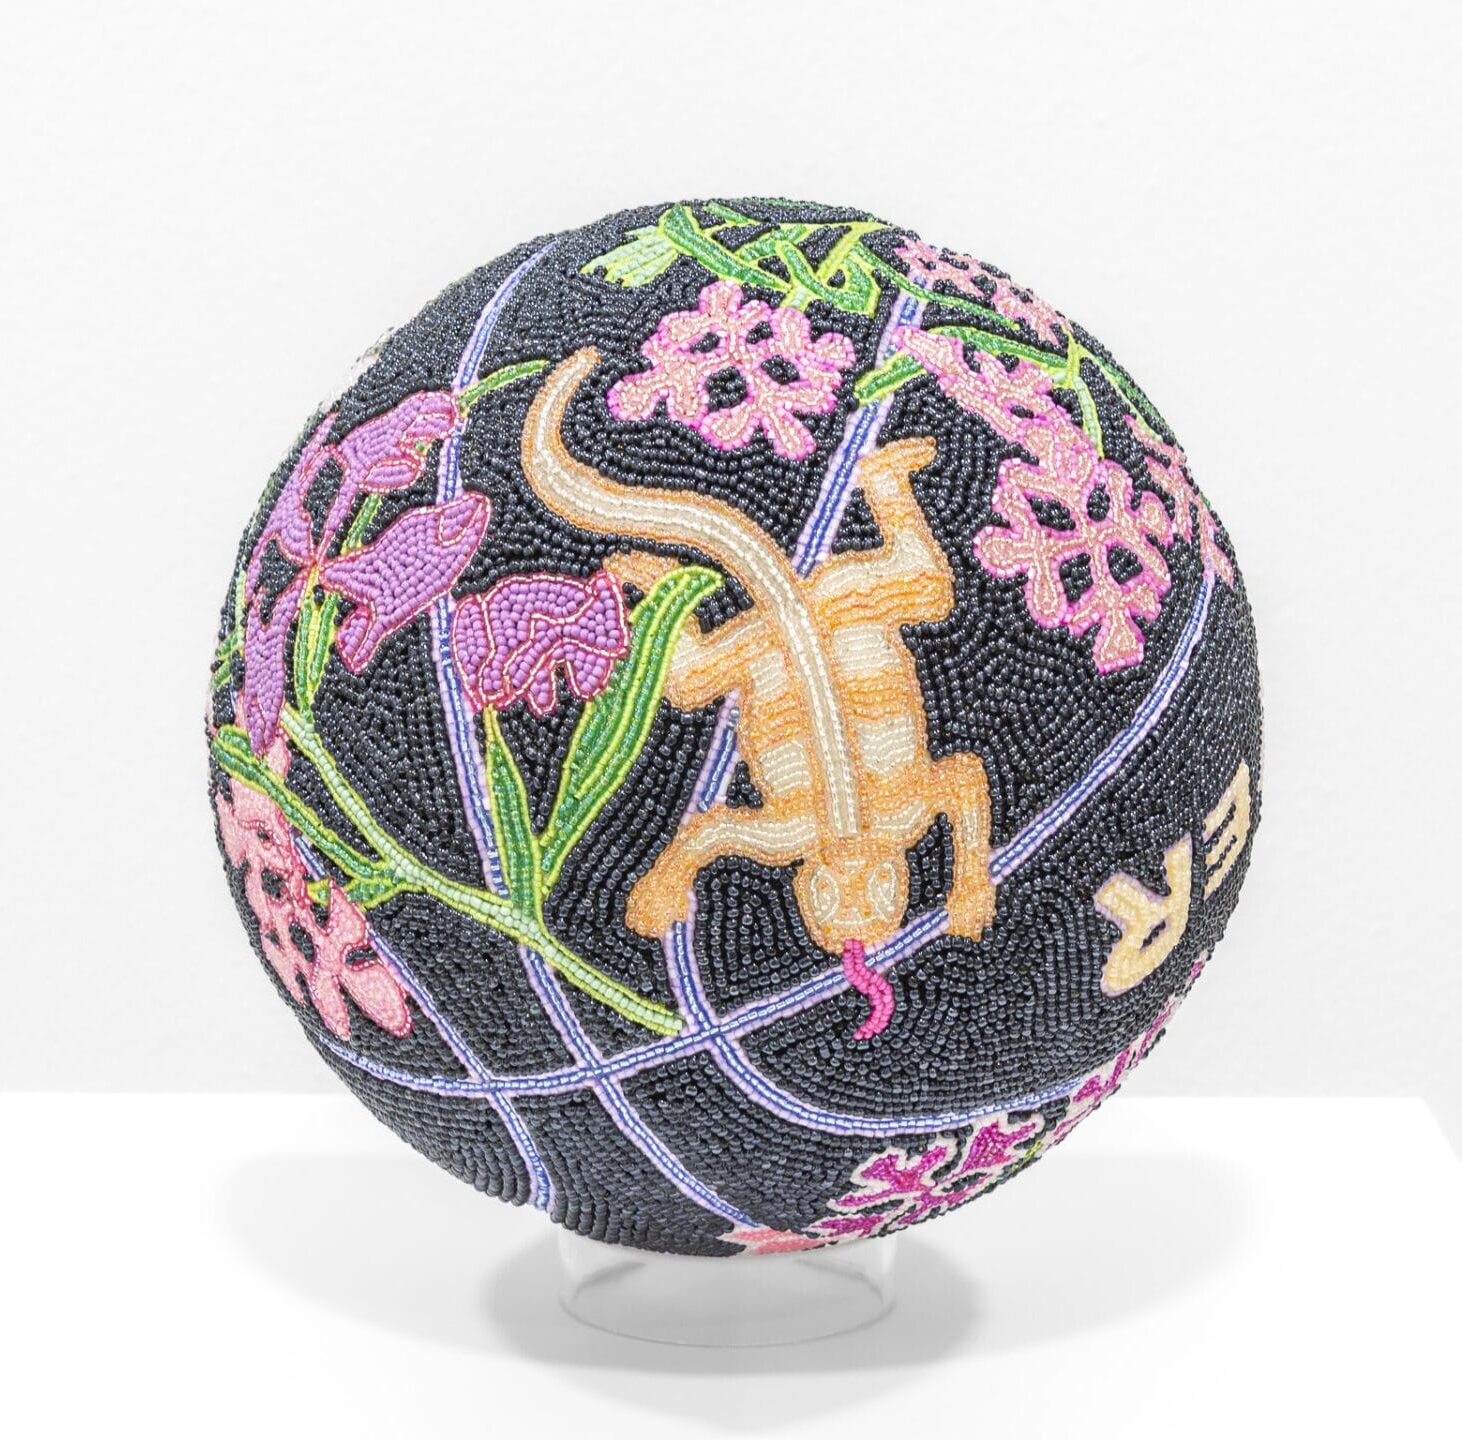 a glass bead-coated spherical sculpture made from a basketball depicting a lizard an flowers on a black backround